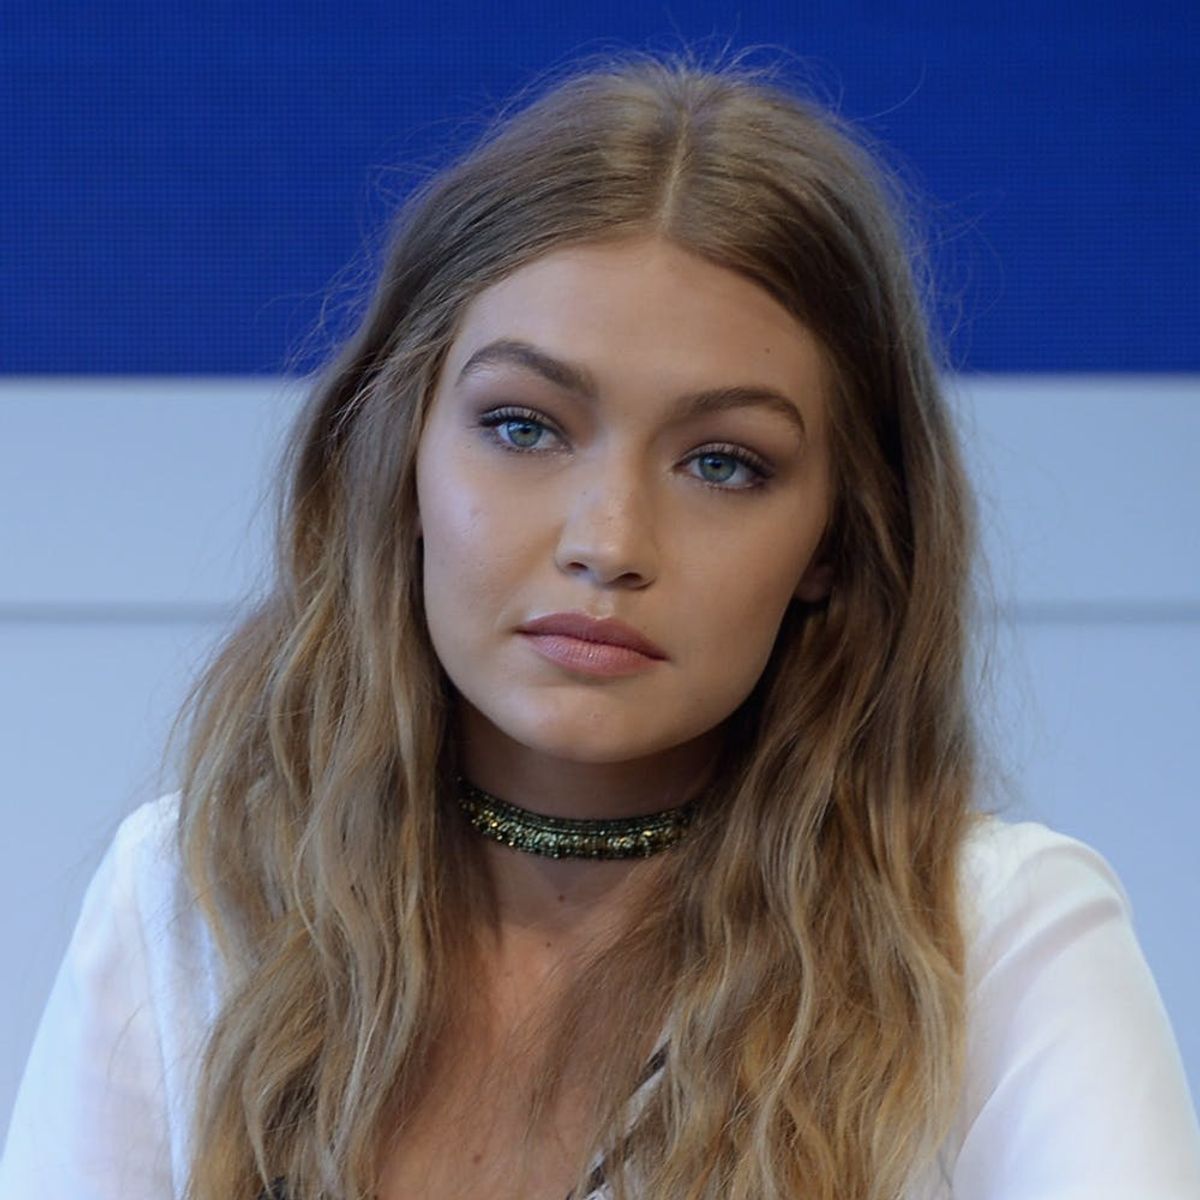 Gigi Hadid Was Attacked by a Male Stranger and Unleashed a Beatdown on Him